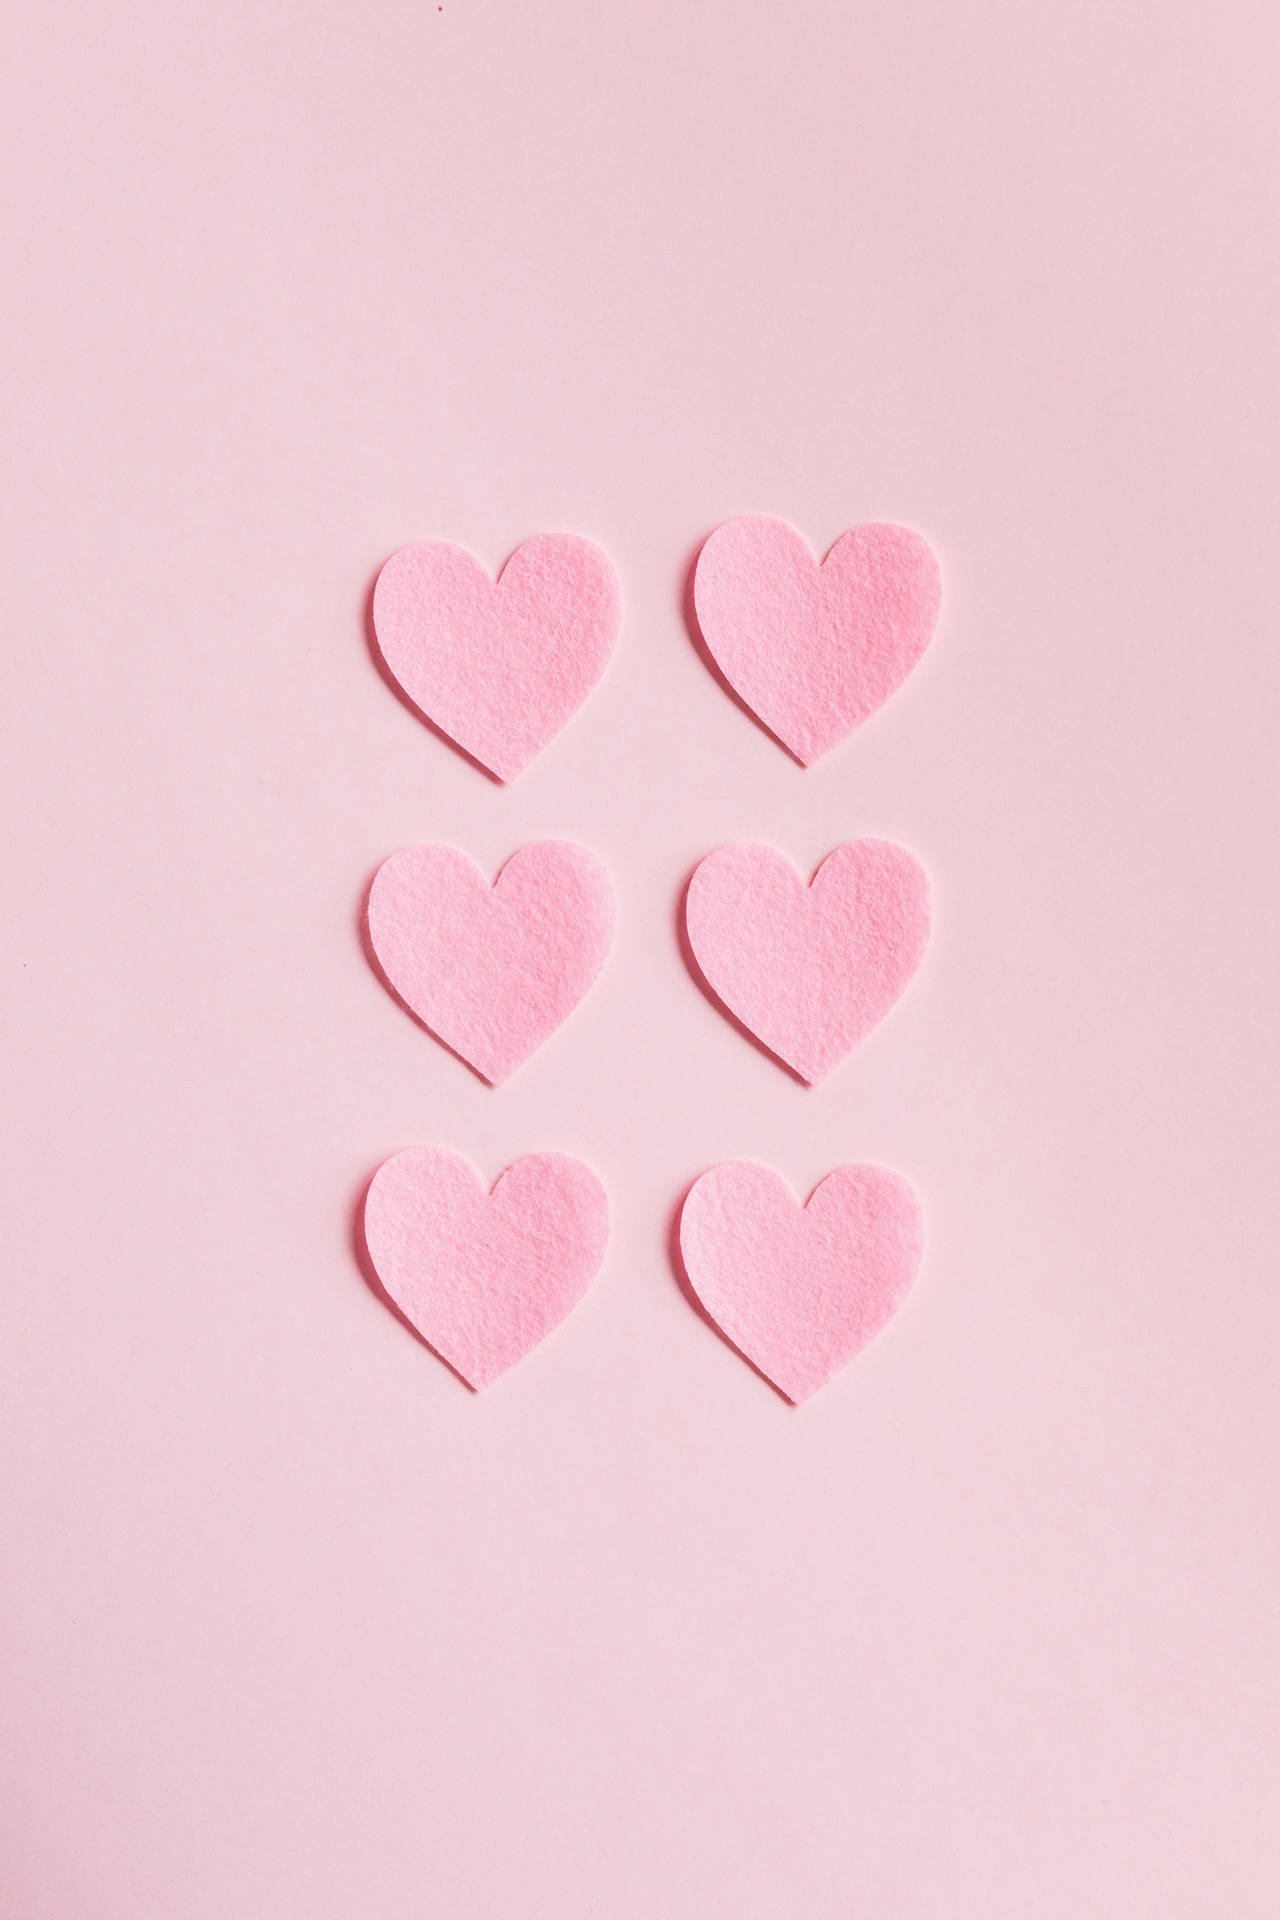 Hearts On Pink Background